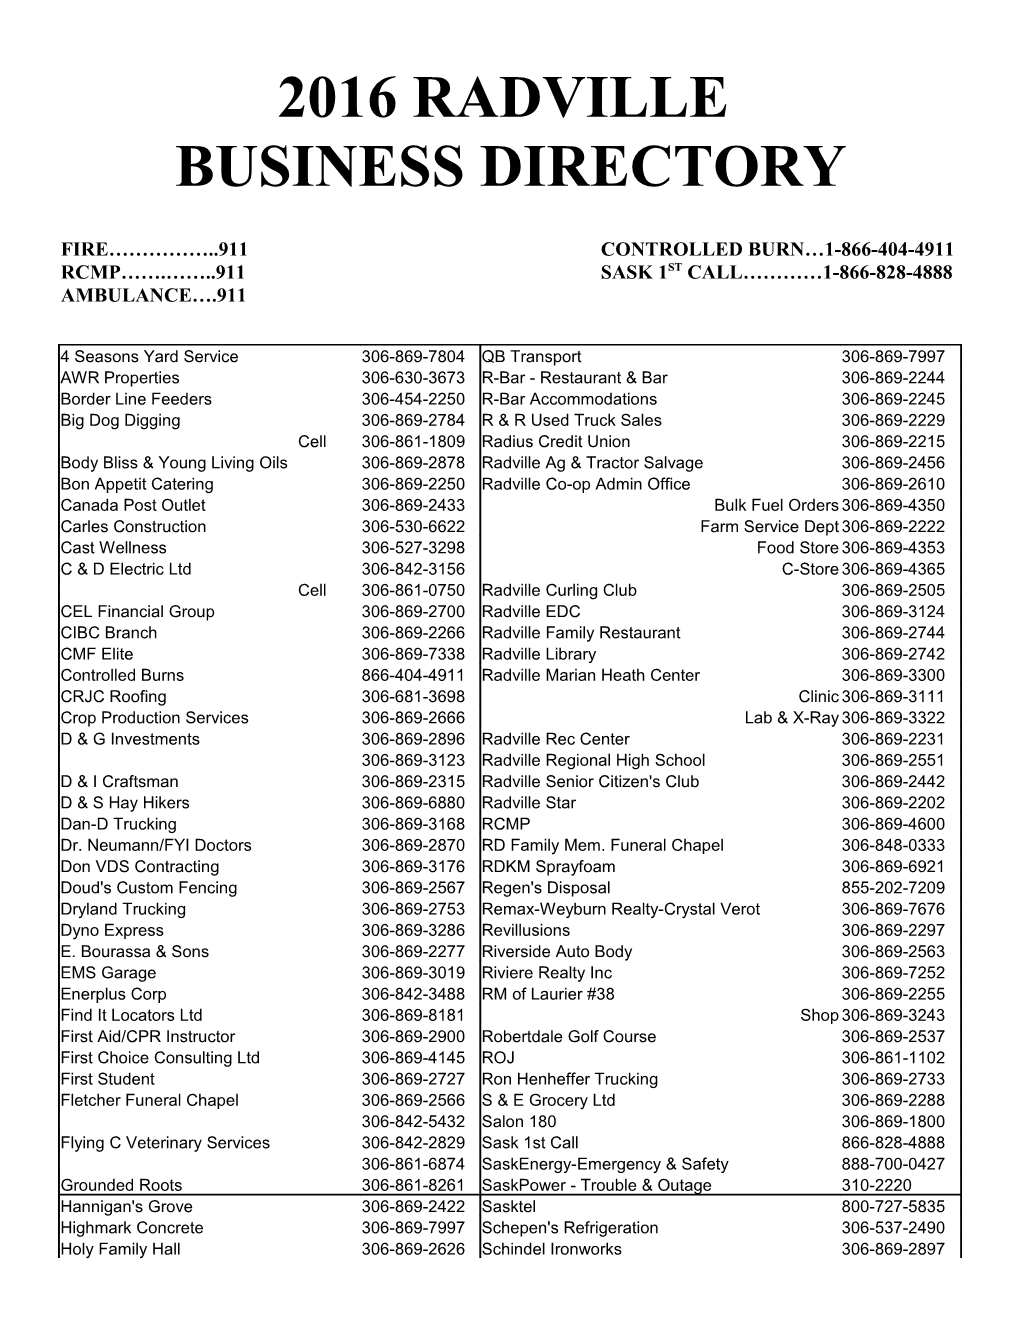 2016 Radville Business Directory